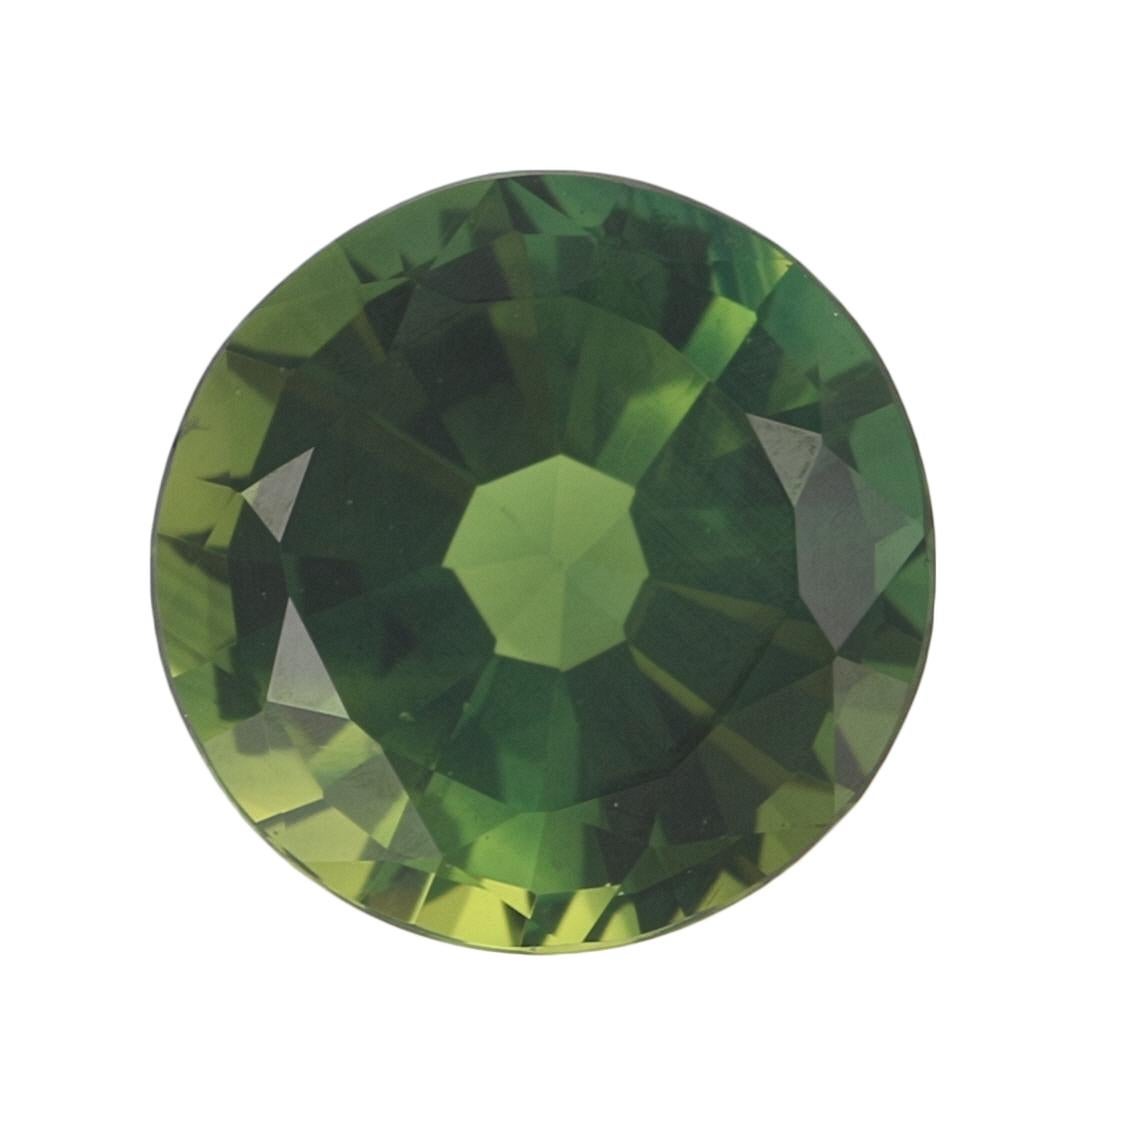 Shape/Cut: Round 
Color: Green
Treatment: Heating 
Diameter (mm): 8.9 
Weight: 3.24ct 

Please check out the enlarged pictures.

Thank you for taking the time to read our description. If you have any questions, please do not hesitate to contact us.